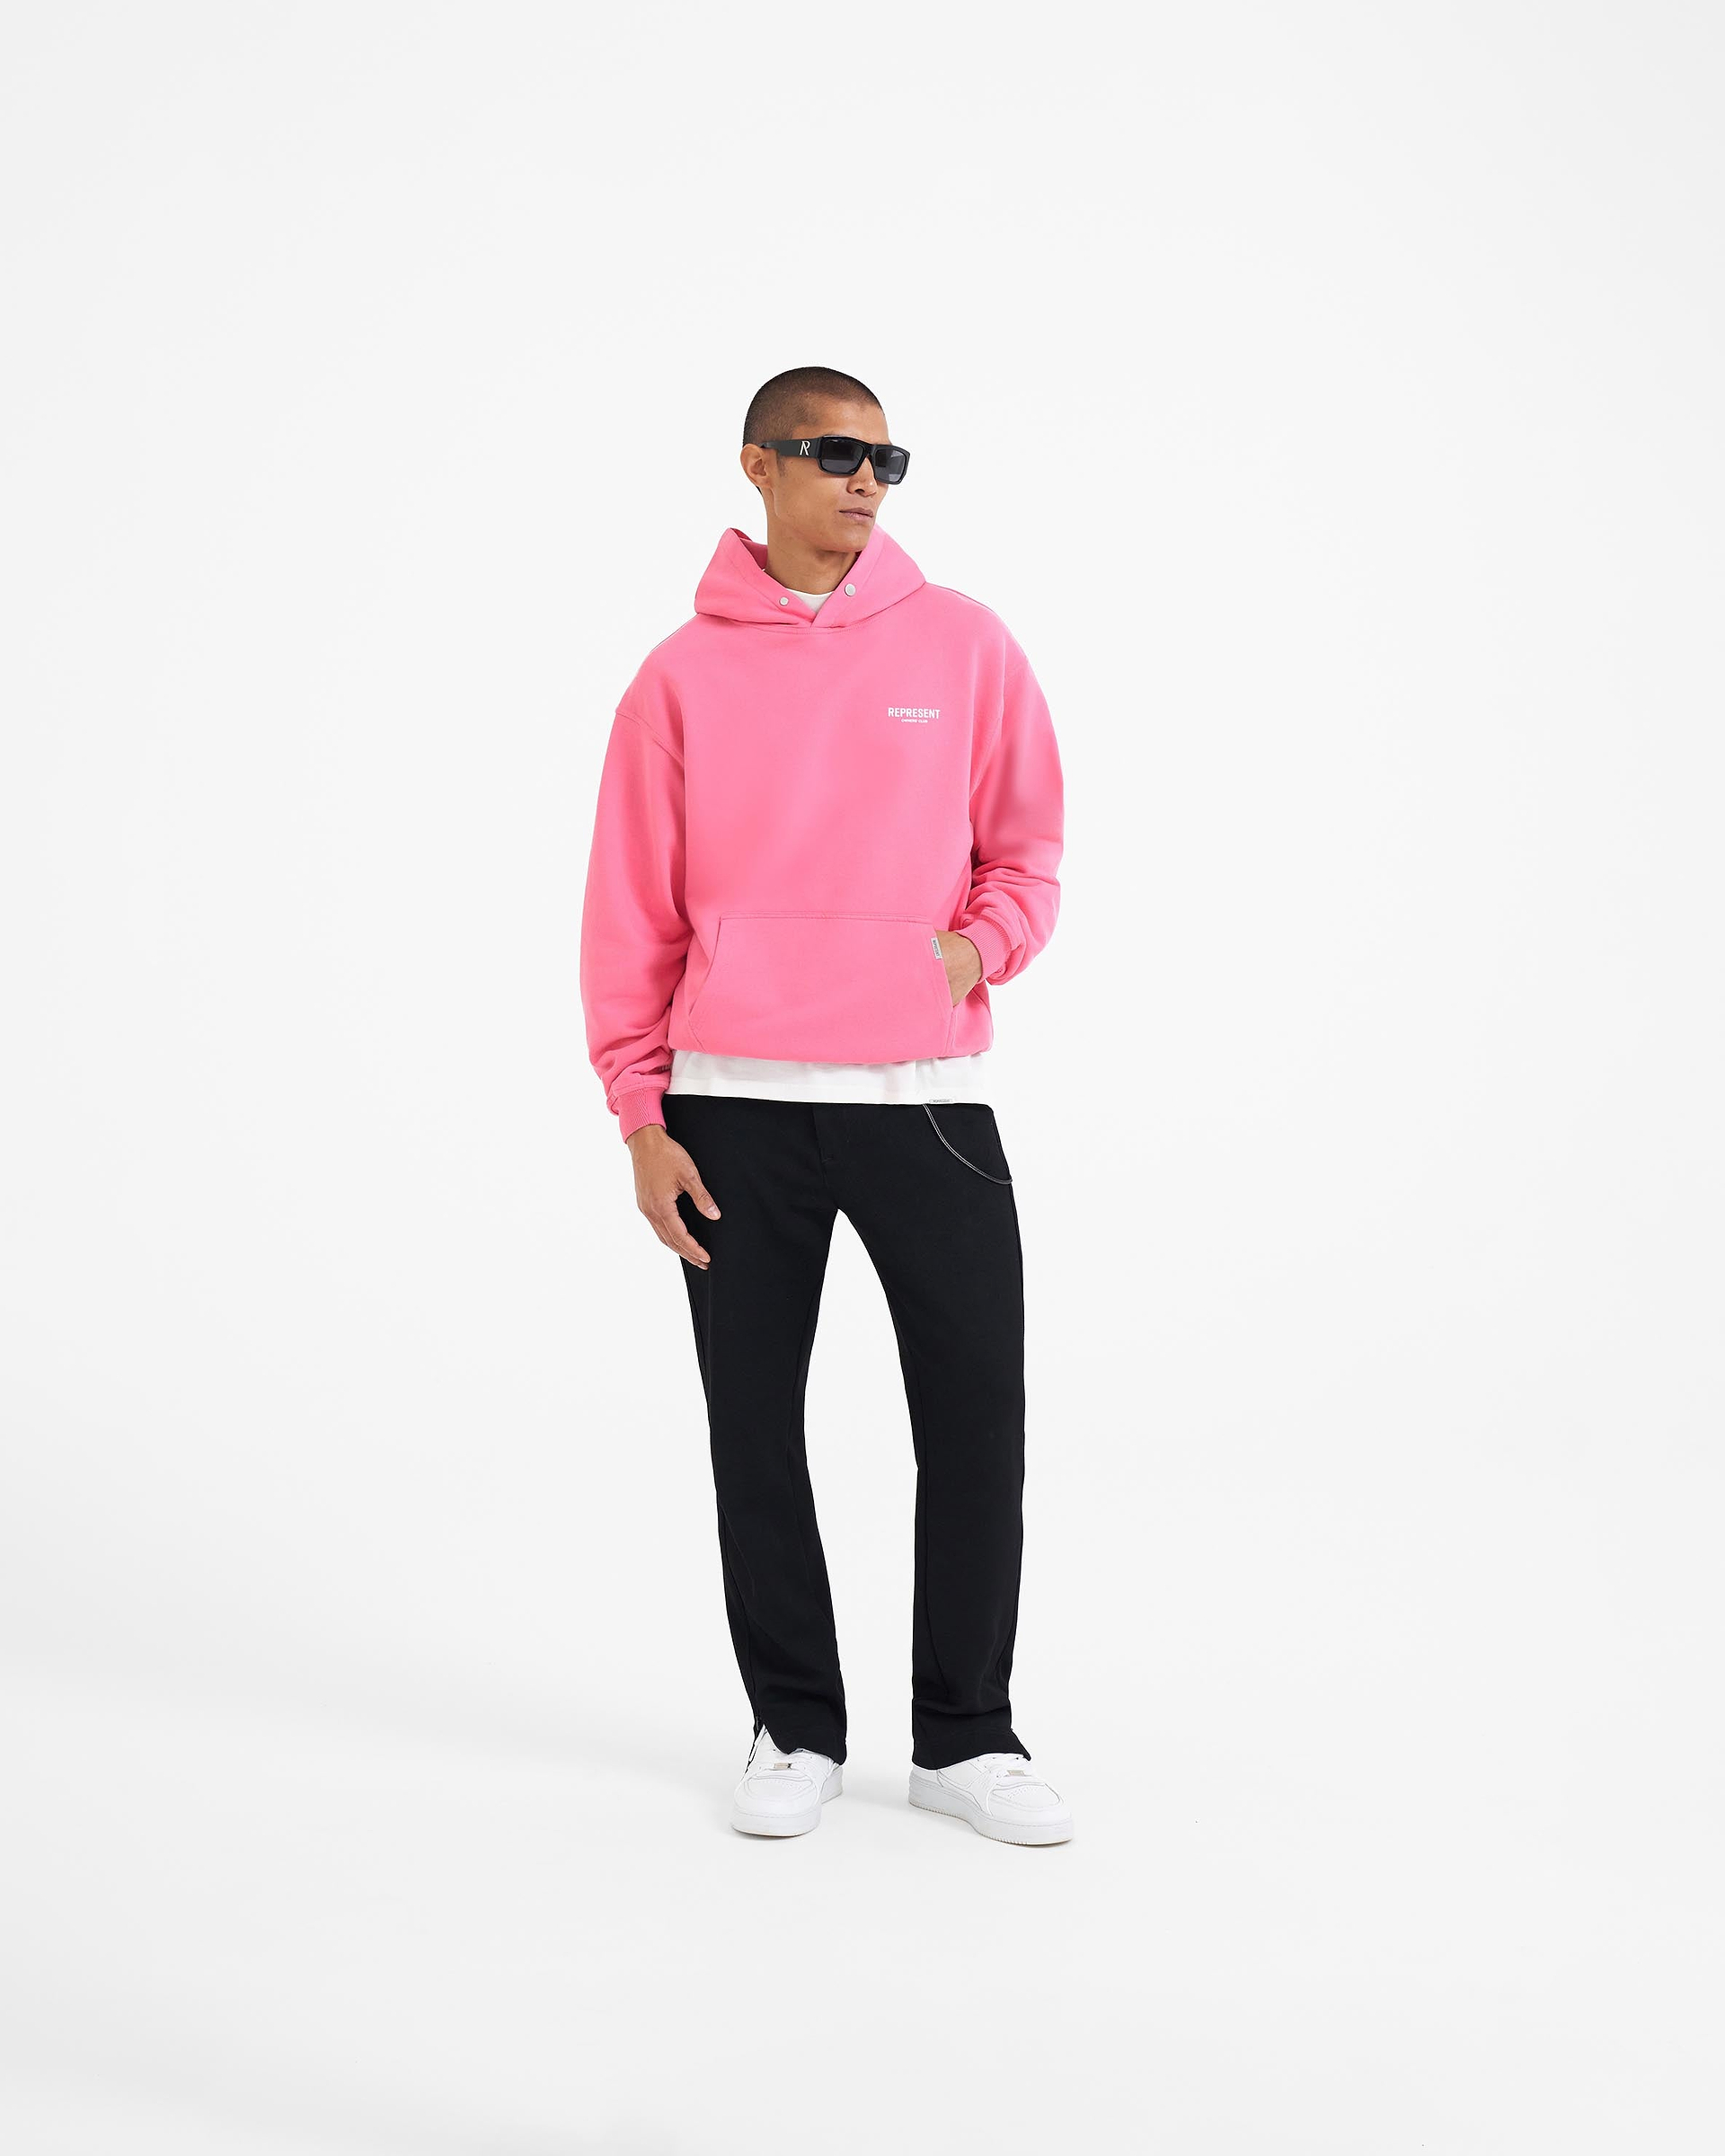 Baby Pink Oversized Fit Sweat Hoodie, Tops